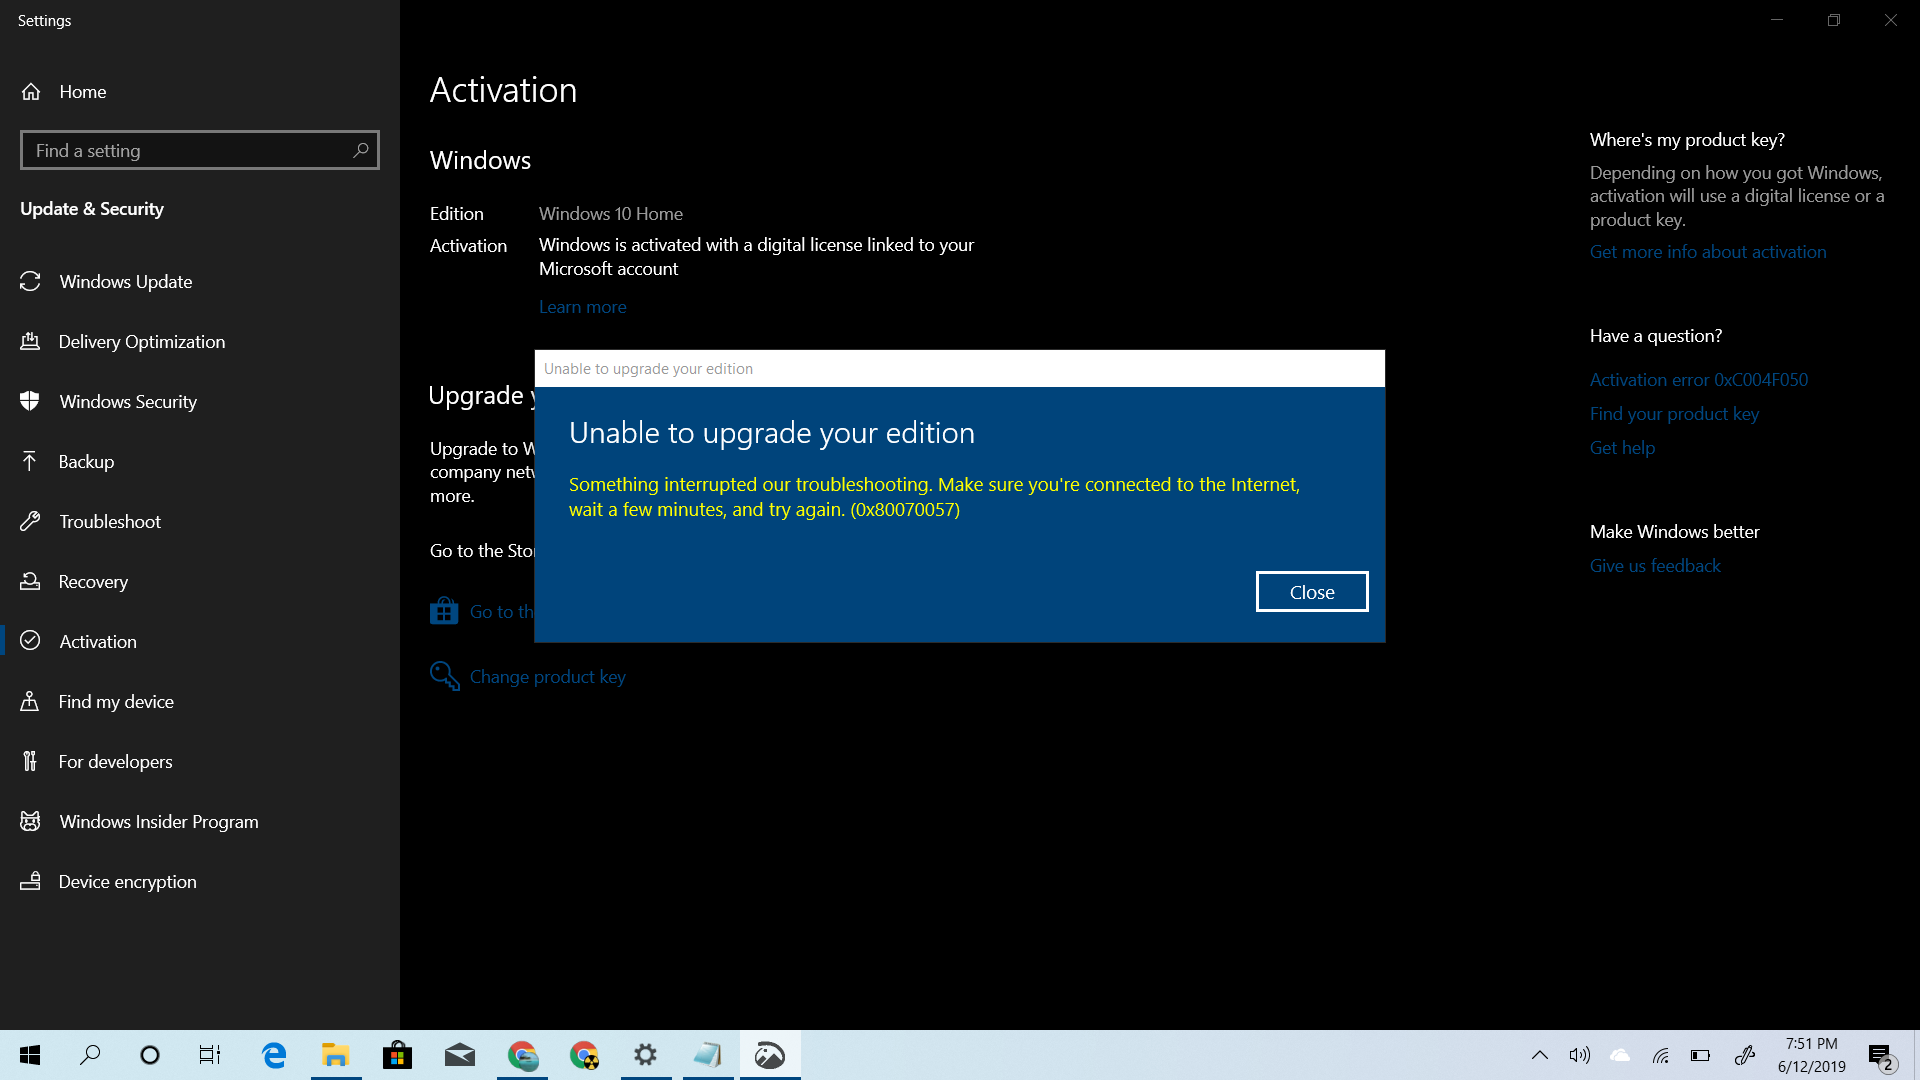 Can't upgrade from windows 10 home to windows 10 pro using windows 7 pro  genuine key